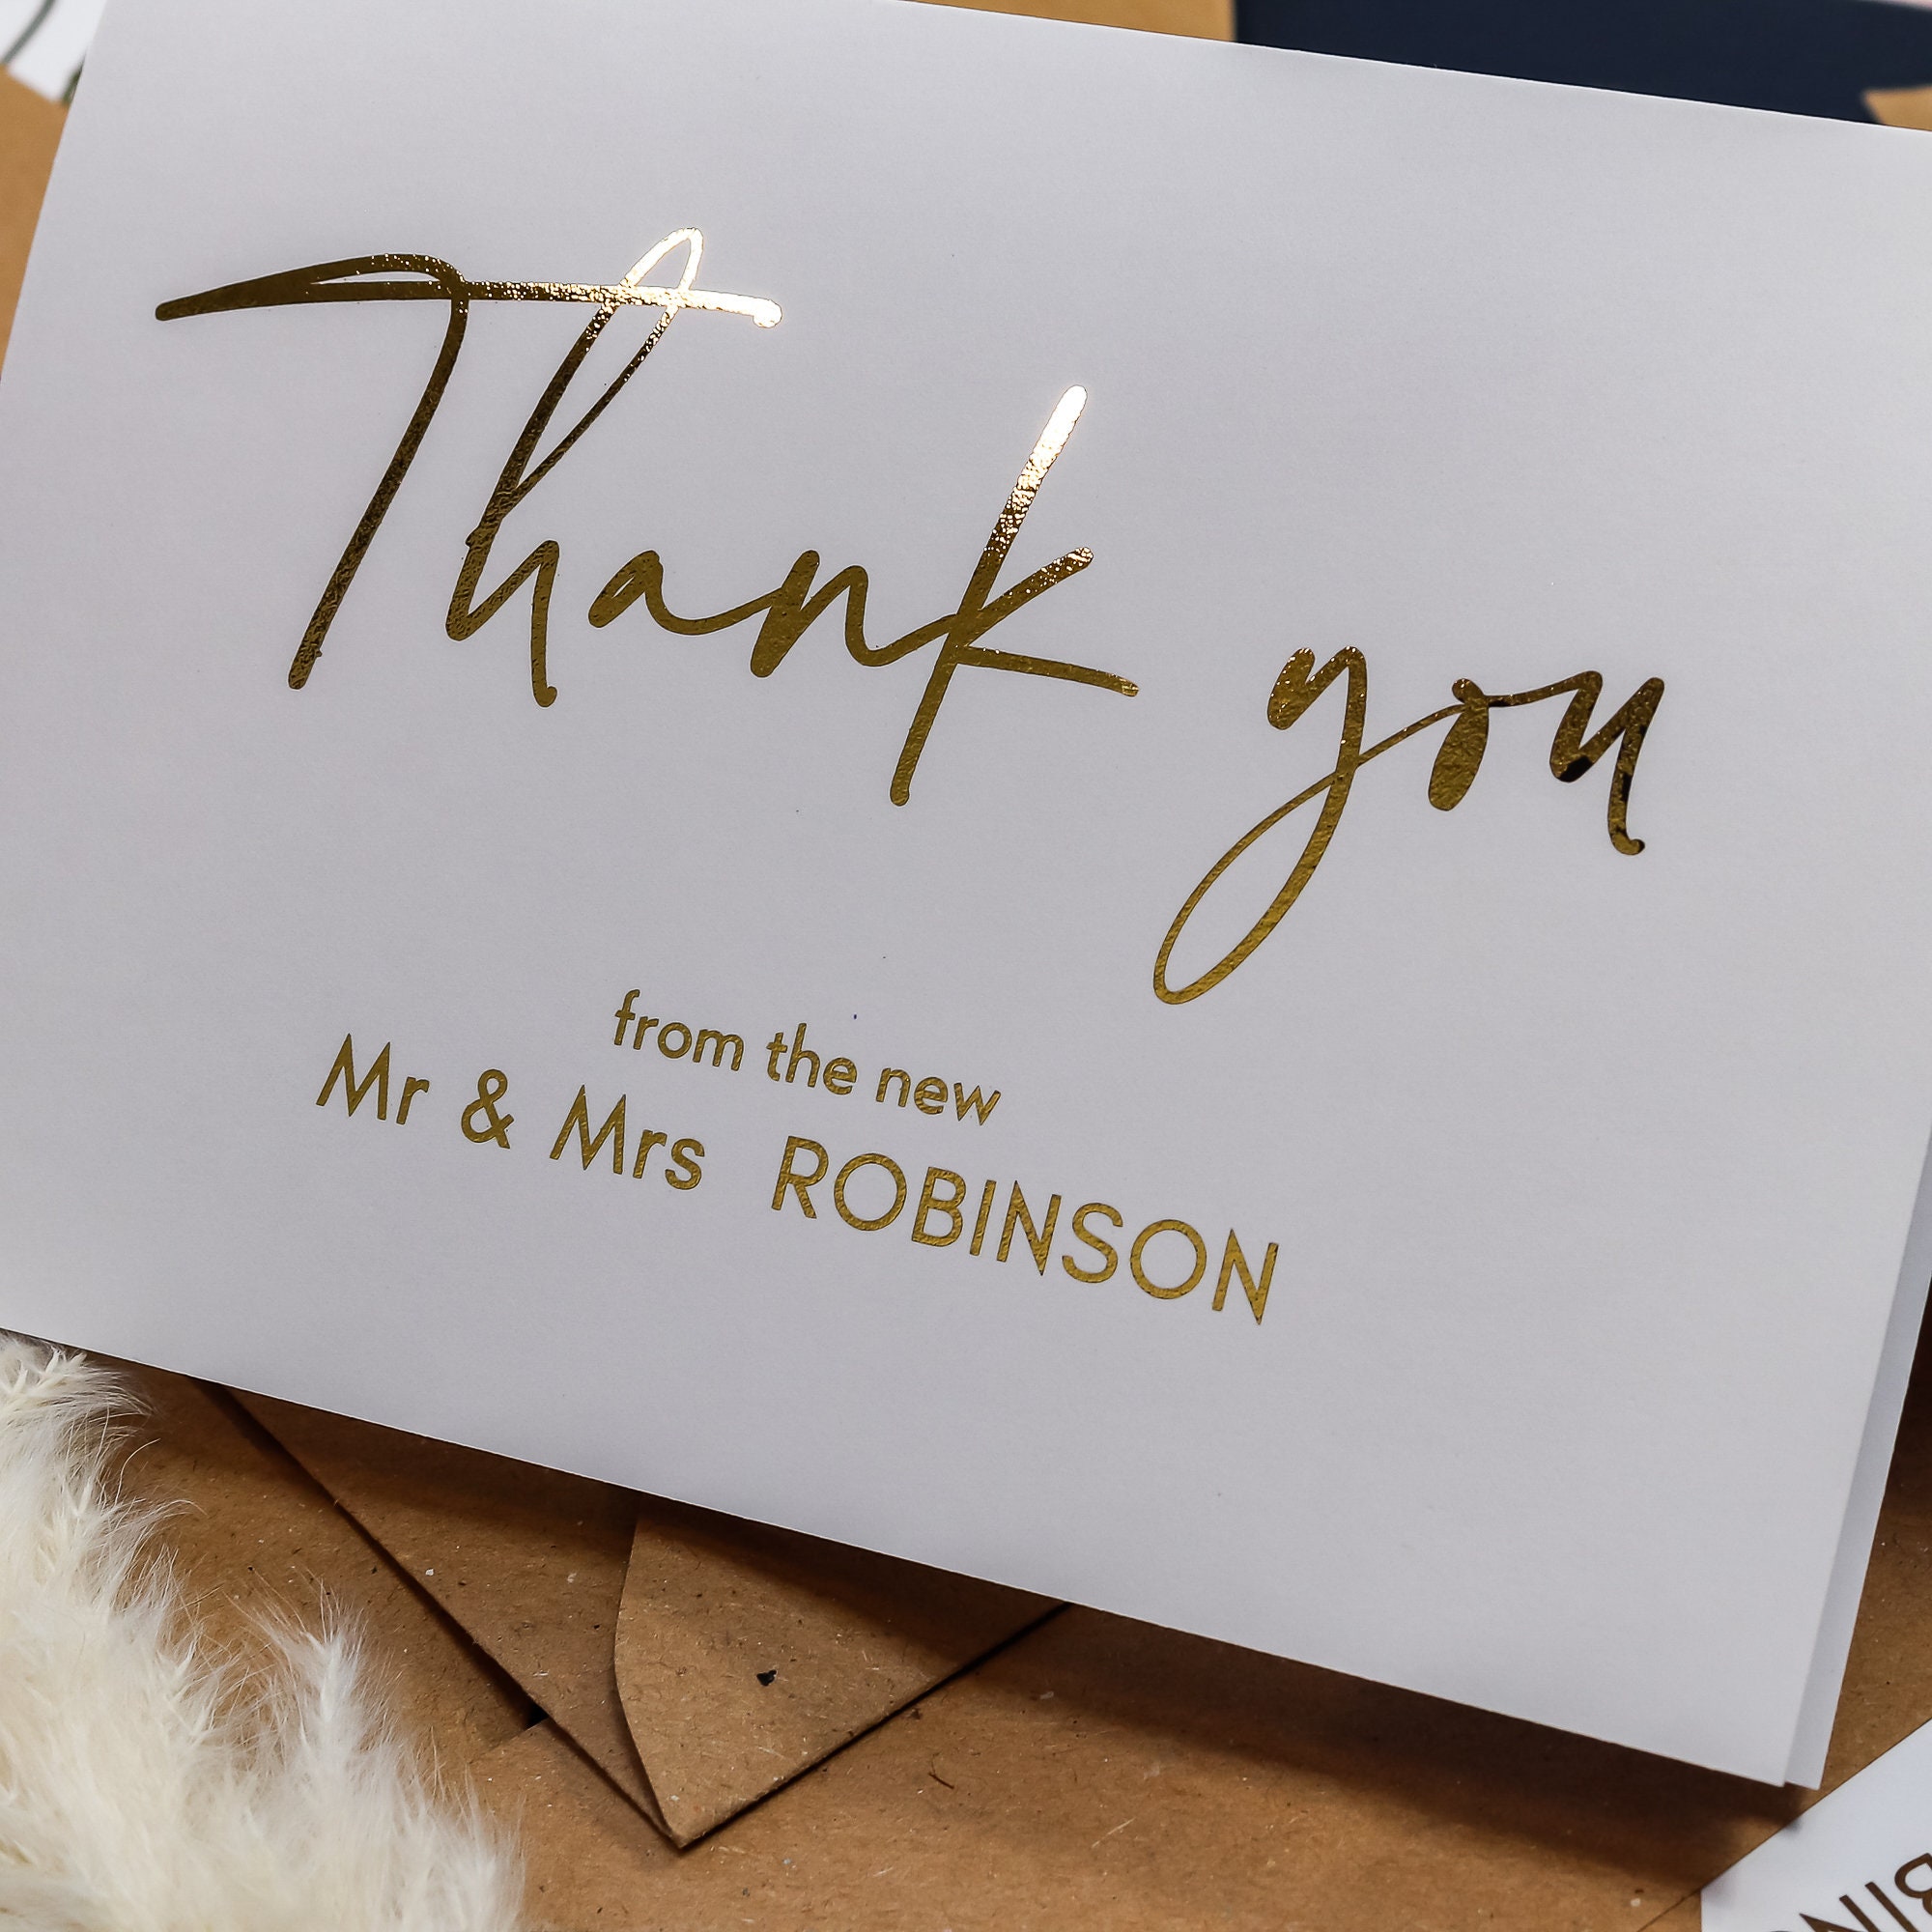 Rileys & Co Thank You Wedding Cards, Gold Foil with Stickers & Envelopes,  50 Pieces, 1 - Kroger